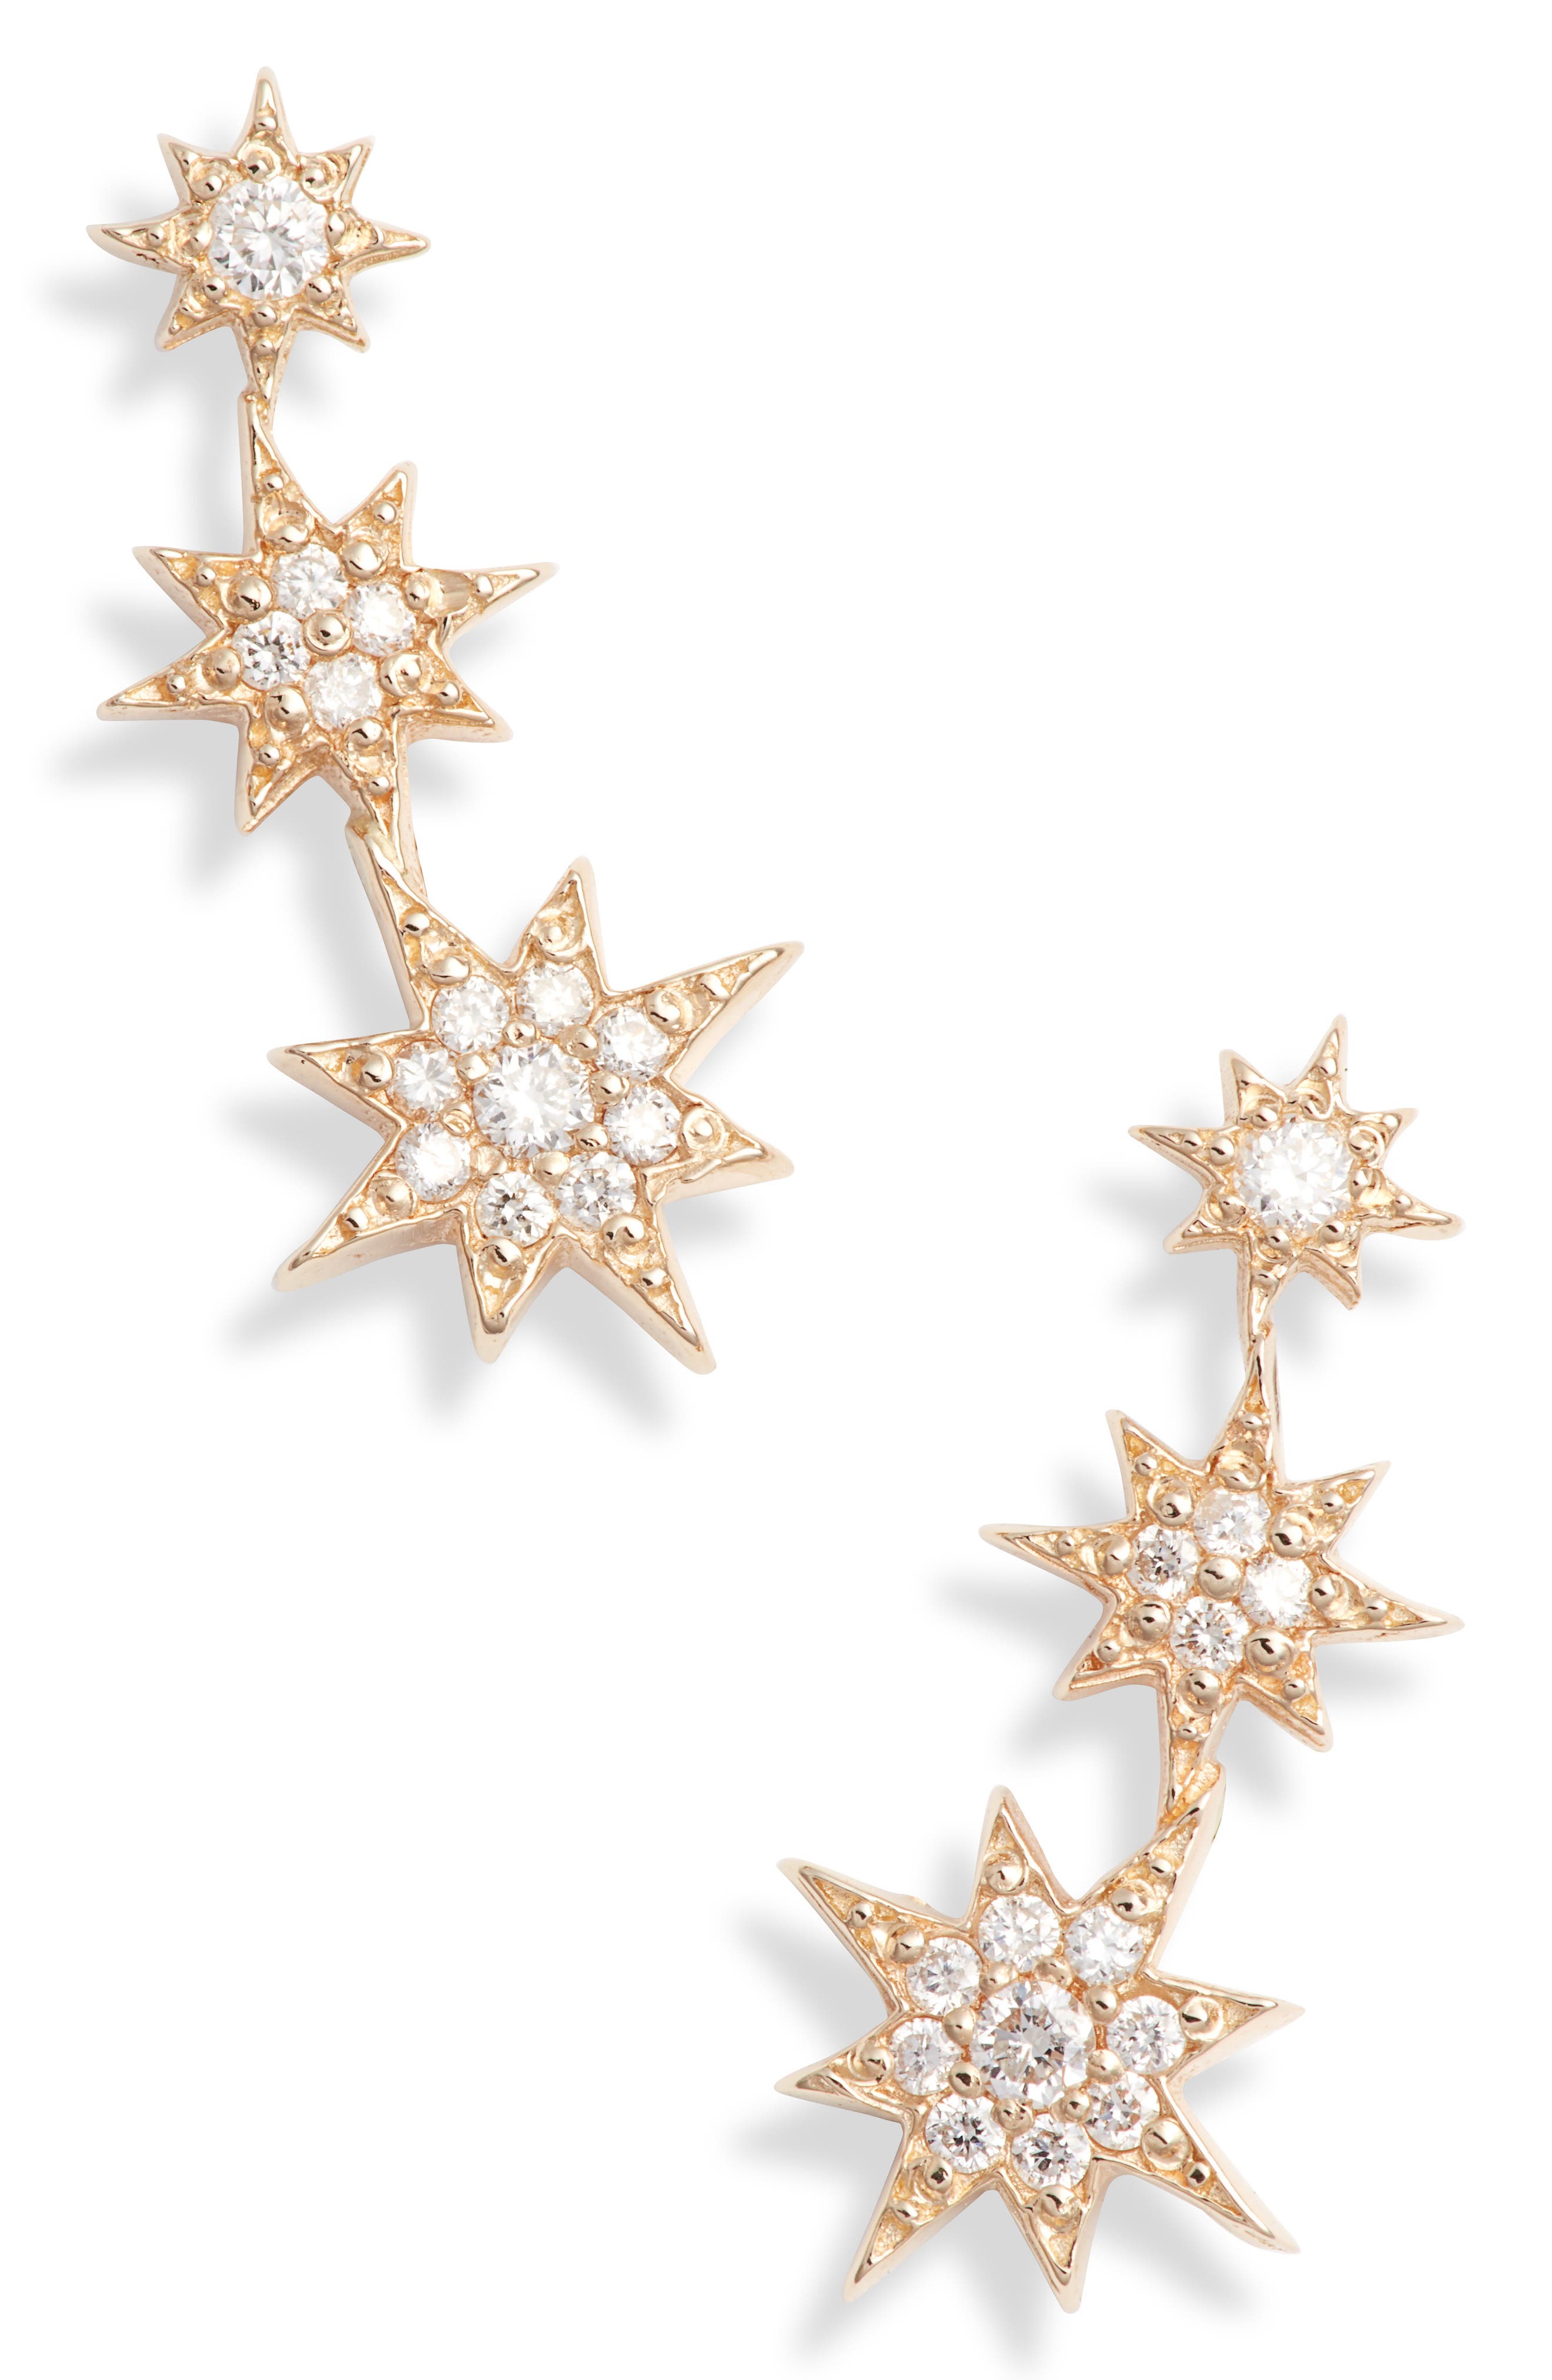 SHASHI Womens Trio Star Cluster Crystal Petite Stud Earrings Gold Plated